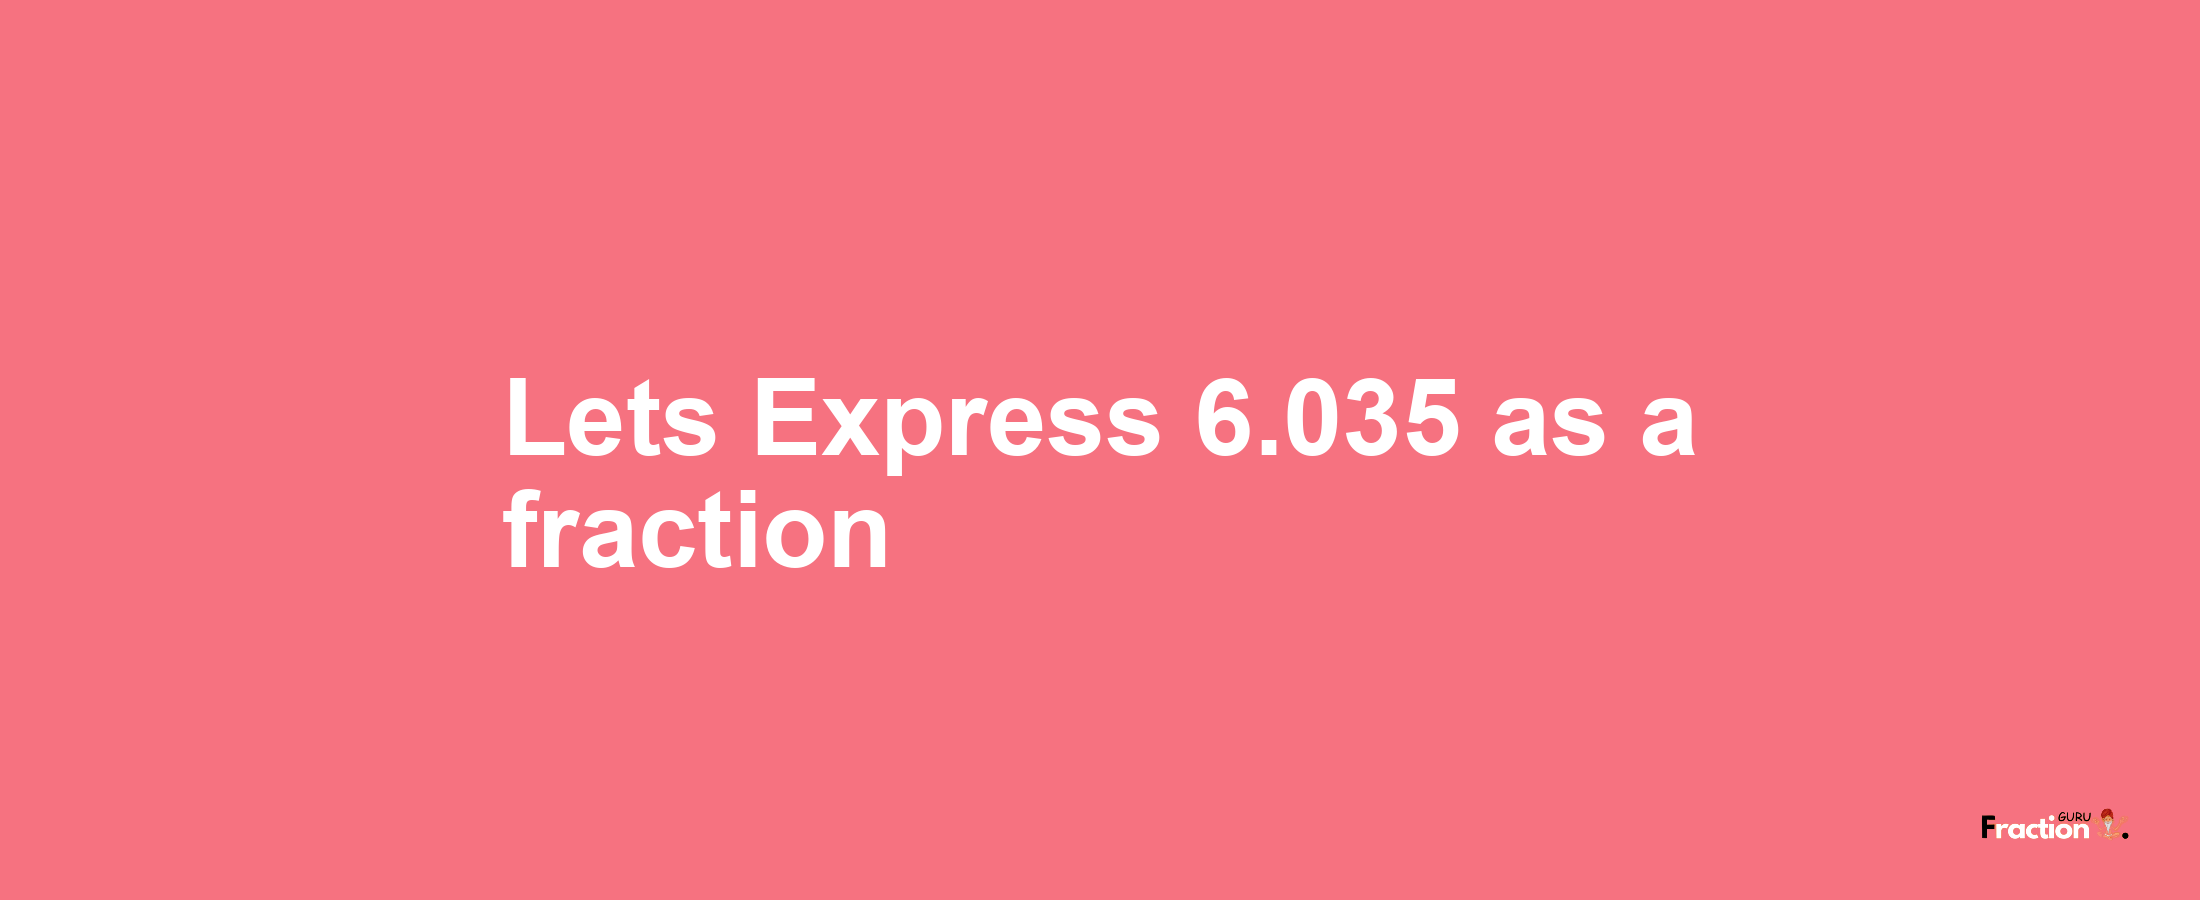 Lets Express 6.035 as afraction